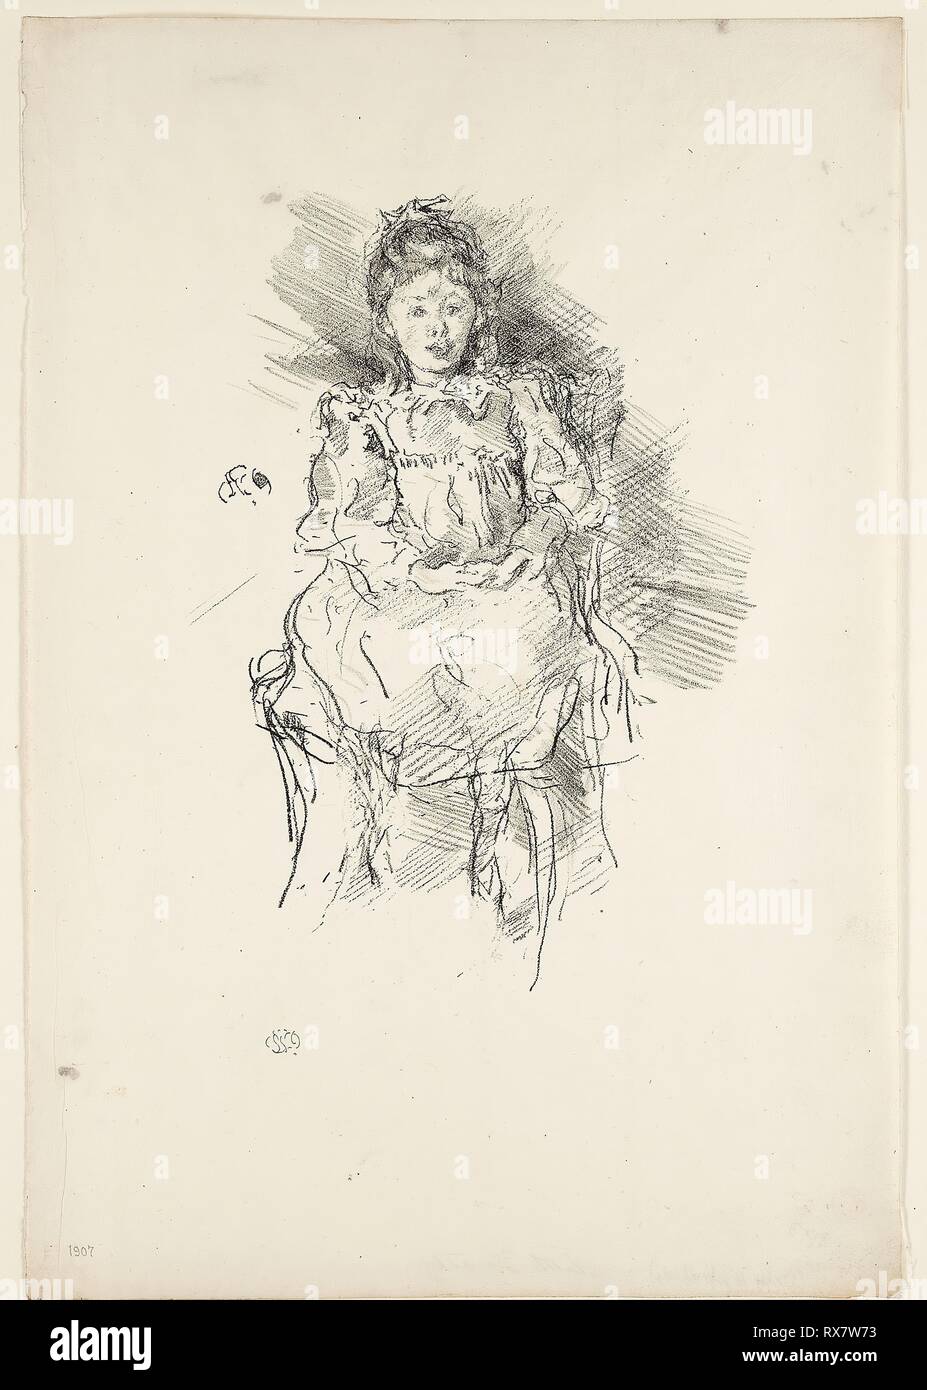 Little Dorothy. James McNeill Whistler; American, 1834-1903. Date: 1896. Dimensions: 193 x 136 mm (image); 307 x 211 mm (sheet). Transfer lithograph in black on ivory wove paper. Origin: United States. Museum: The Chicago Art Institute. Stock Photo